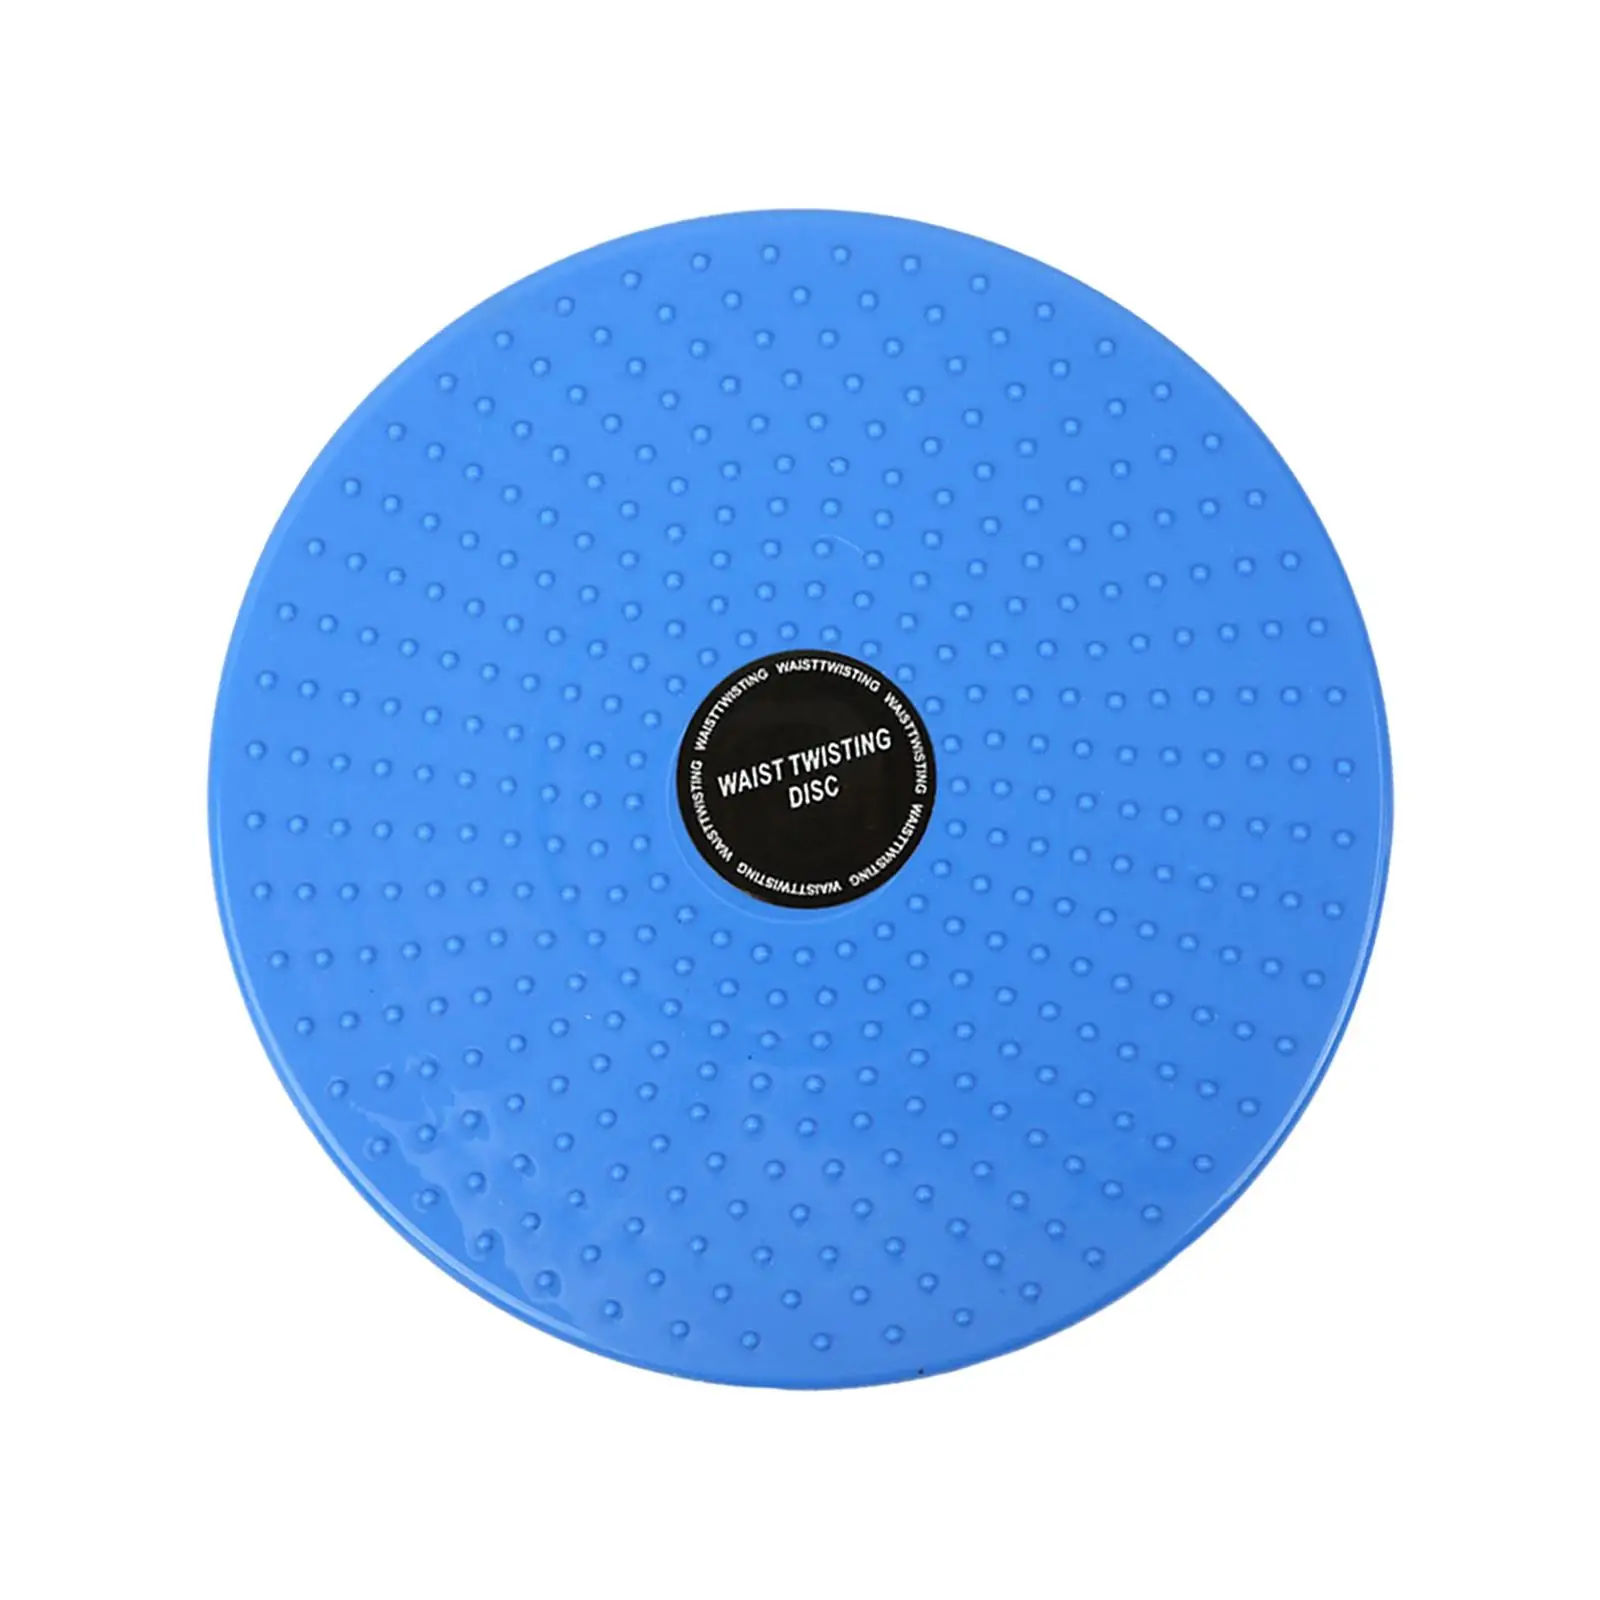 Core Ab Twisting Board Mute Body Building Home Use Magnetic Massage Full Body Workout Waist Twisting Disc Waist Twist Disc Board